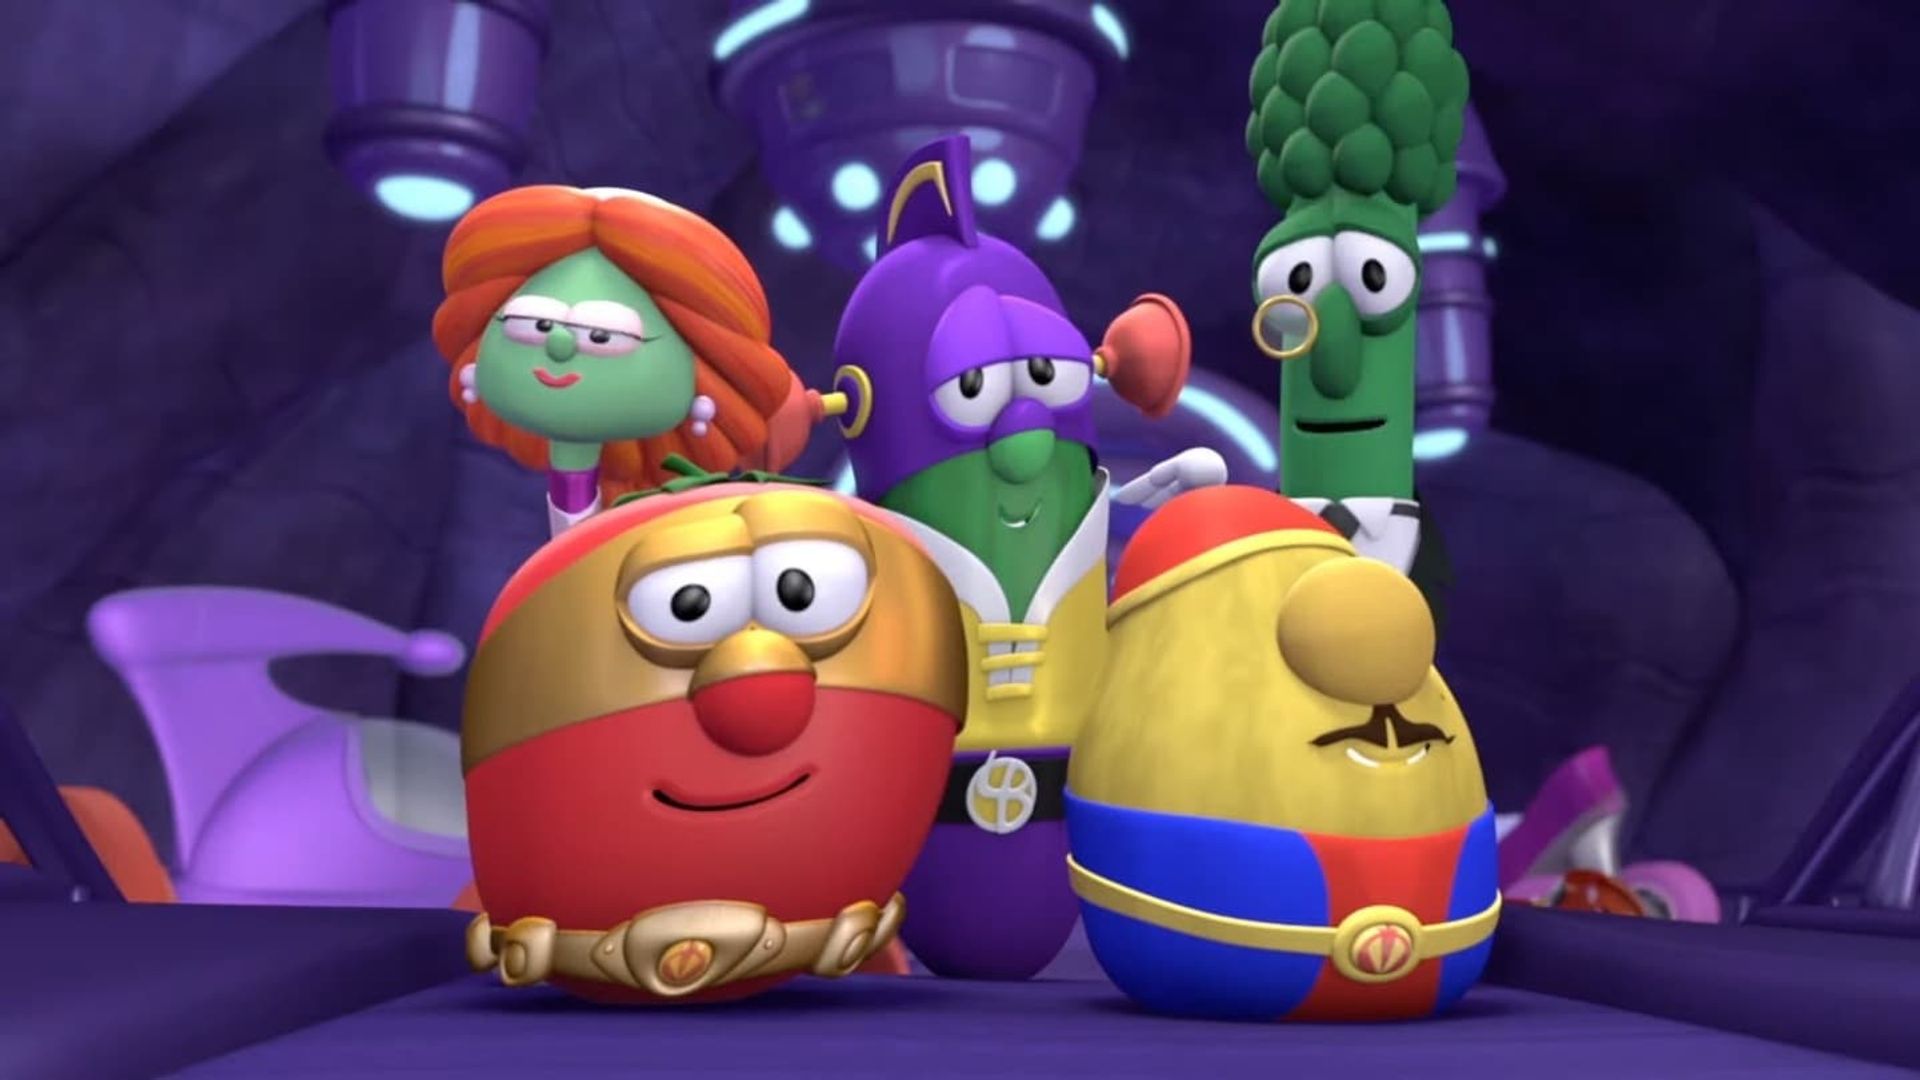 VeggieTales: The League of Incredible Vegetables background